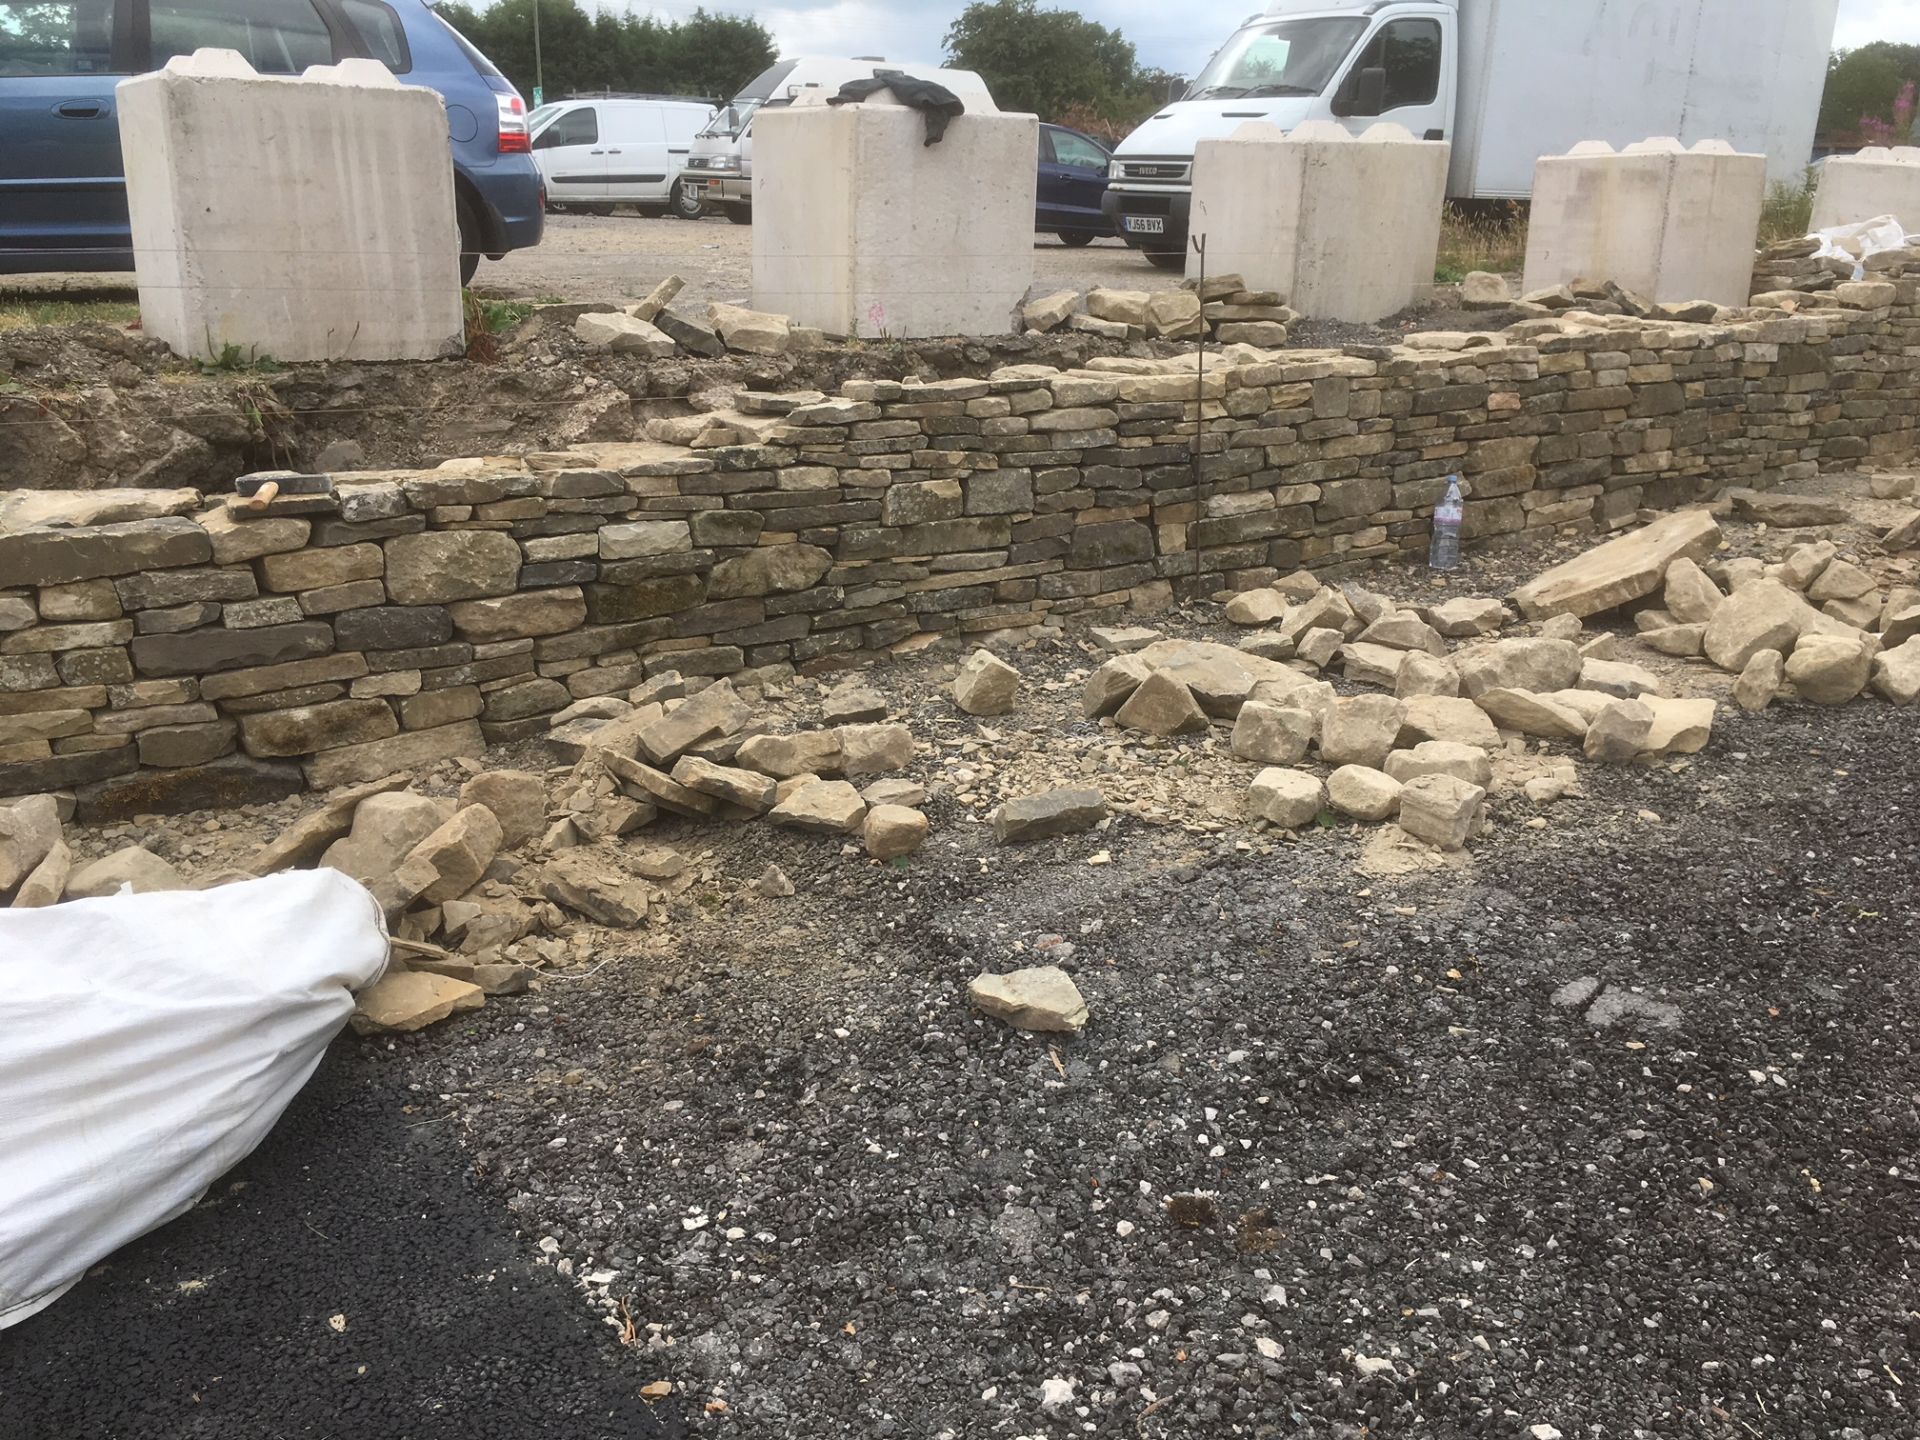 24 bulk bags Yorkshire Dry Stone Walling, each bag 1tonne, which approximately equates to 1m² of - Image 3 of 9